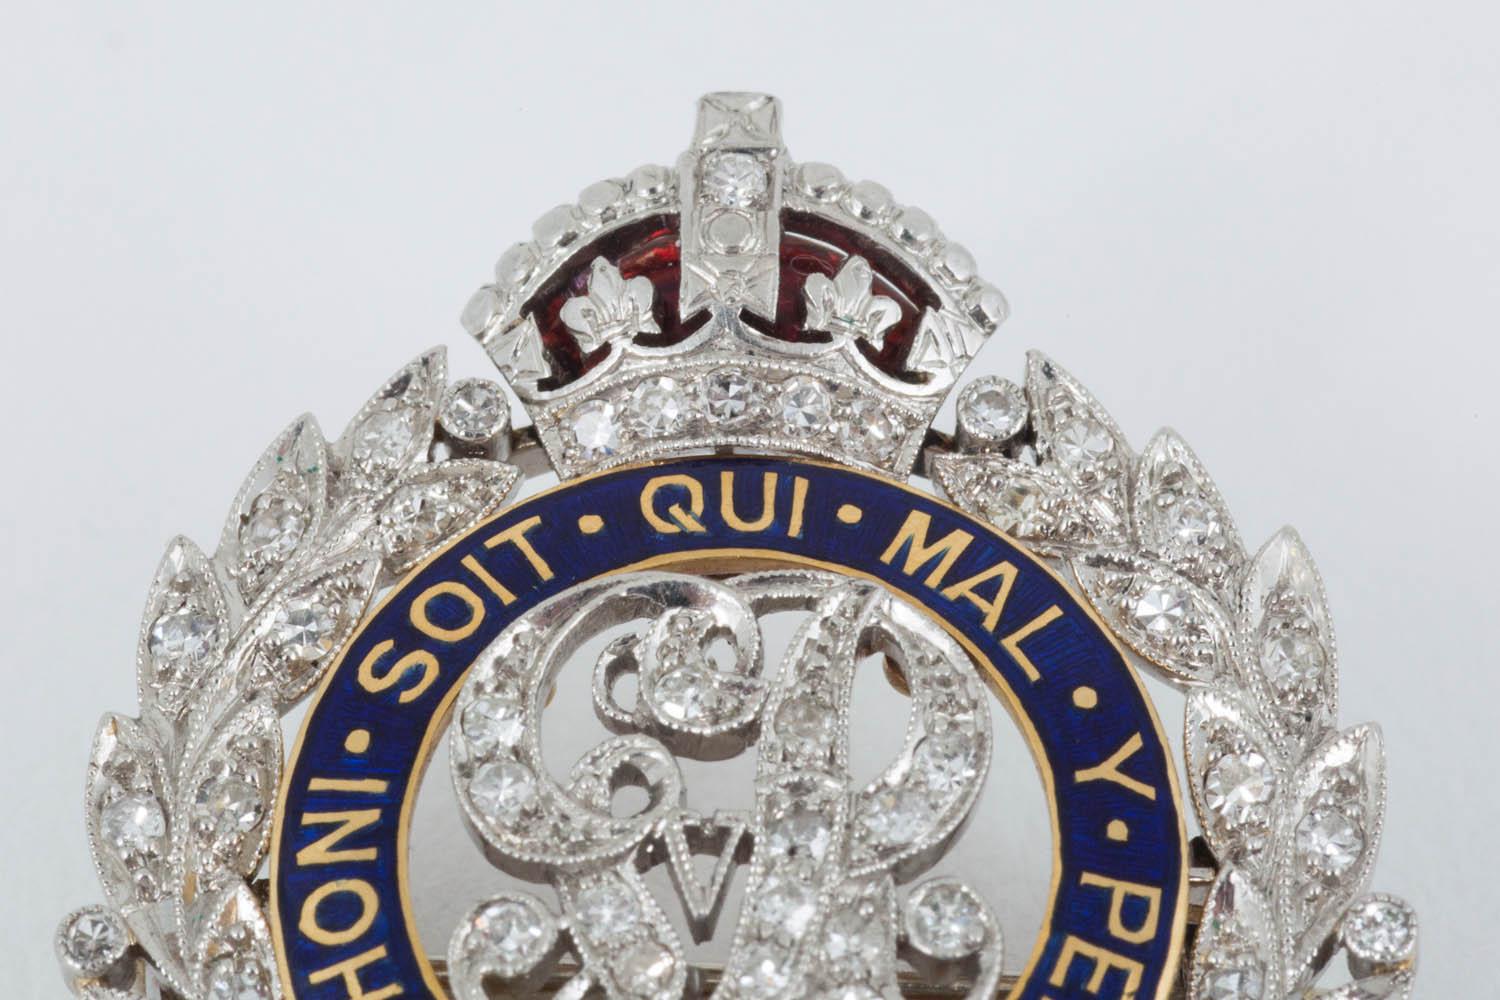 A finely made, period, blue enamel and diamond set brooch in the form of the Royal Engineers,red enamel crown.English c 1920